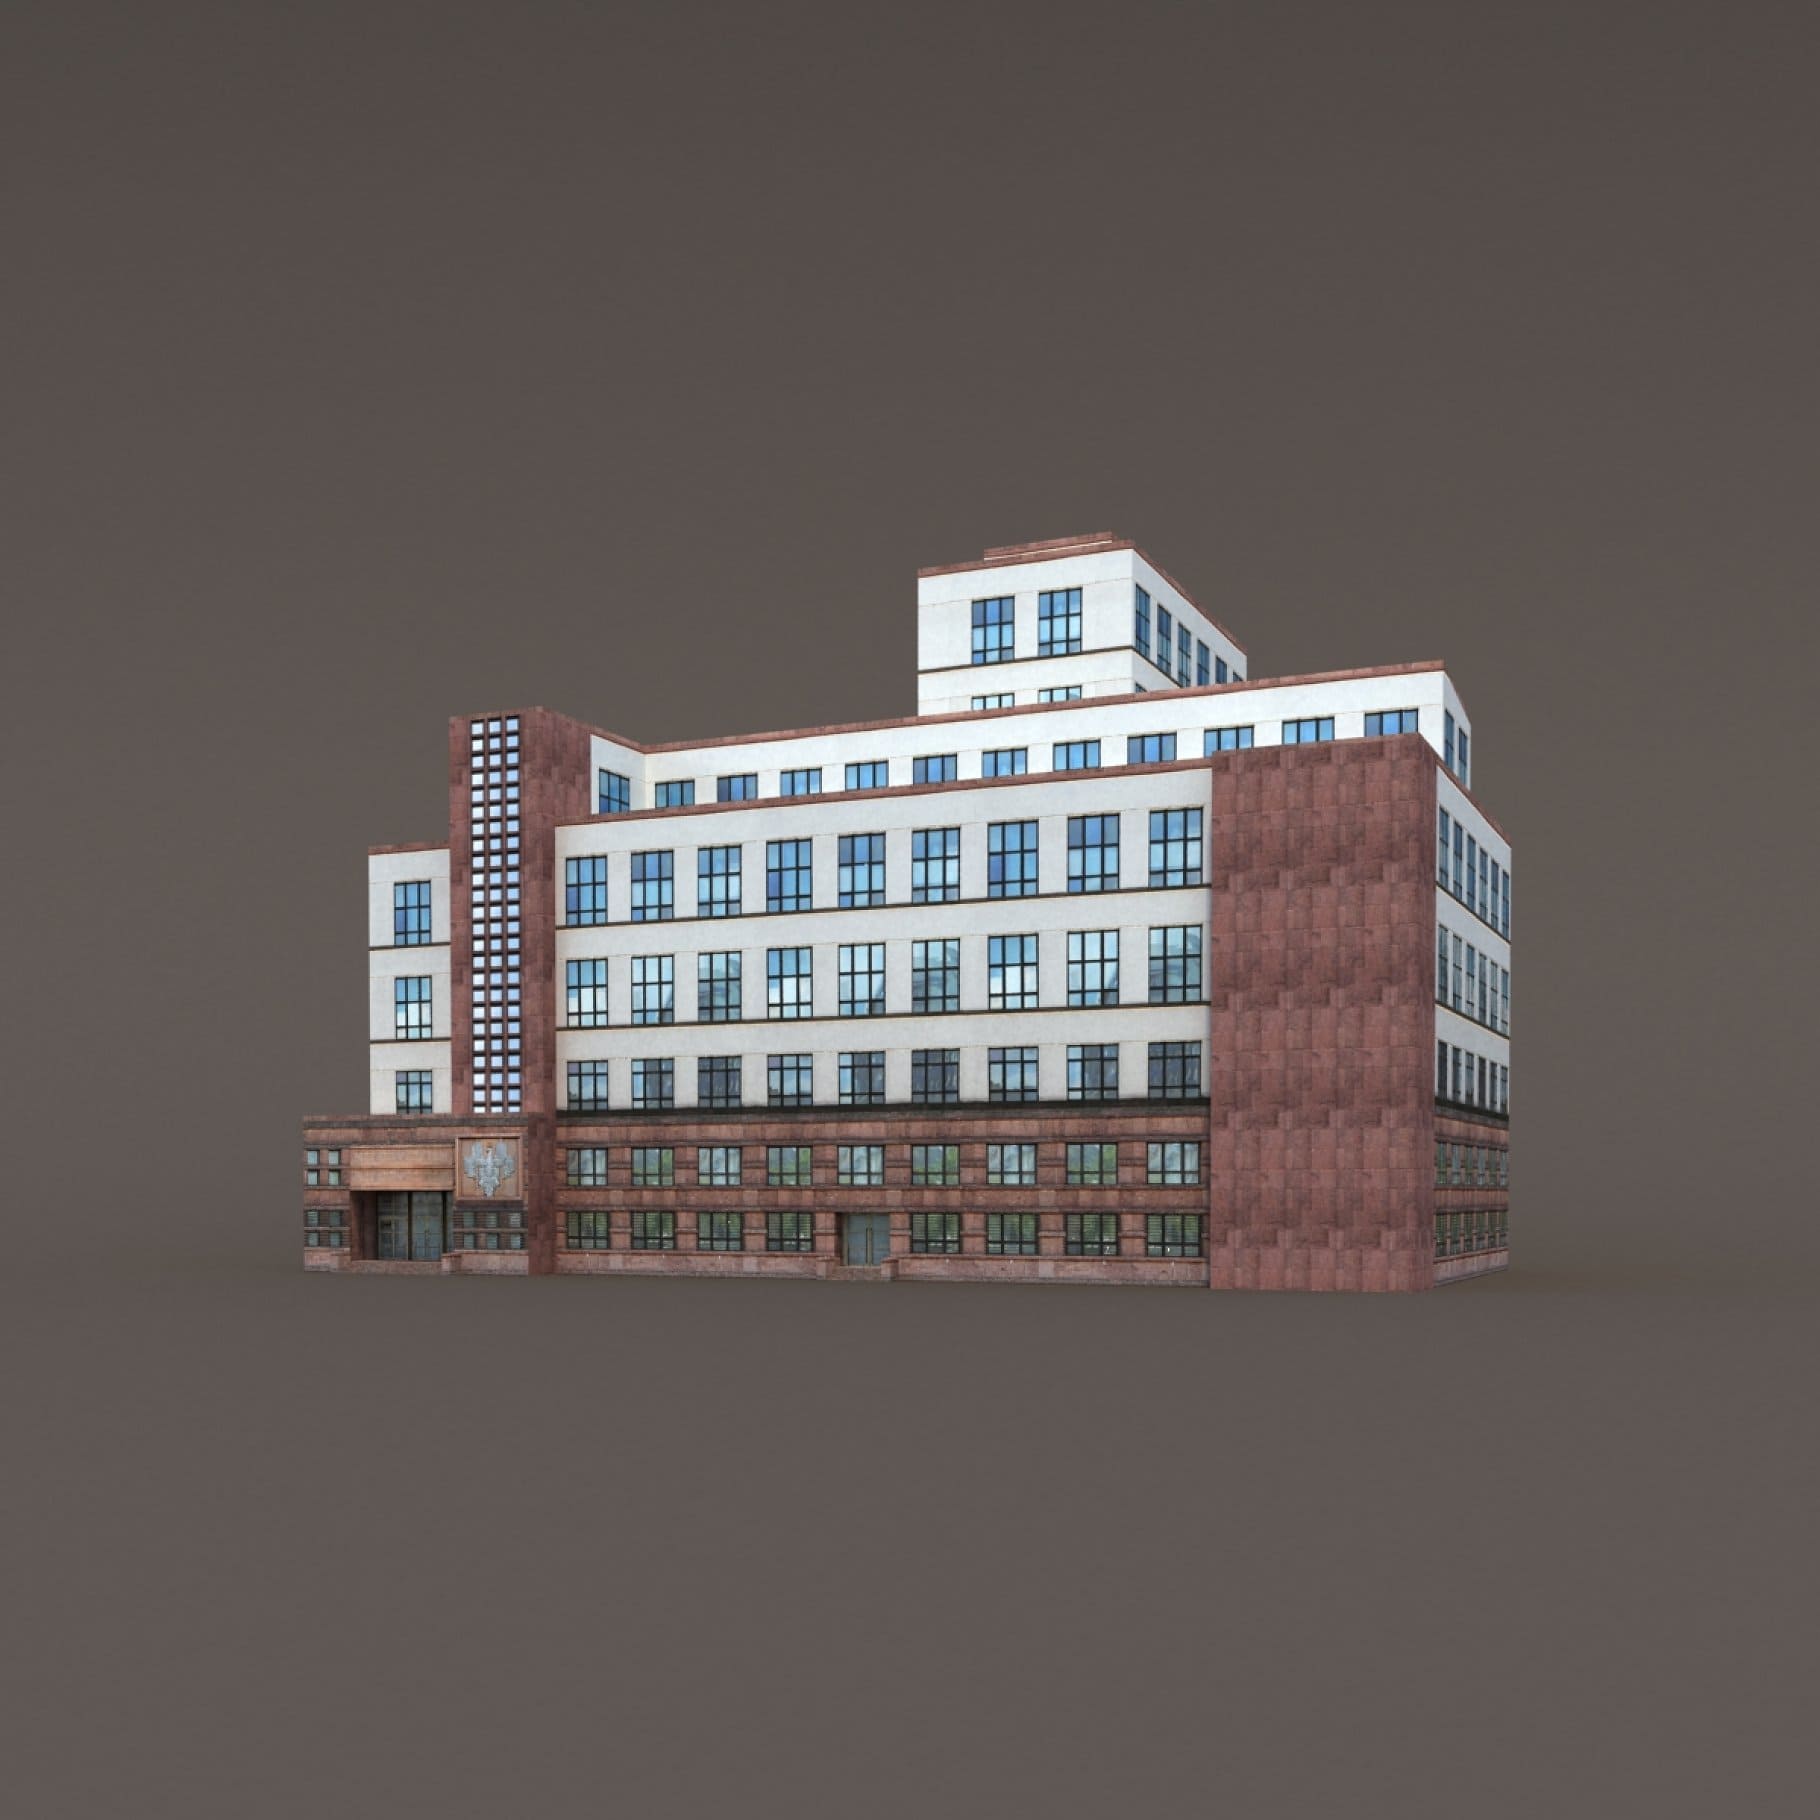 3D model of an office building on a gray background.